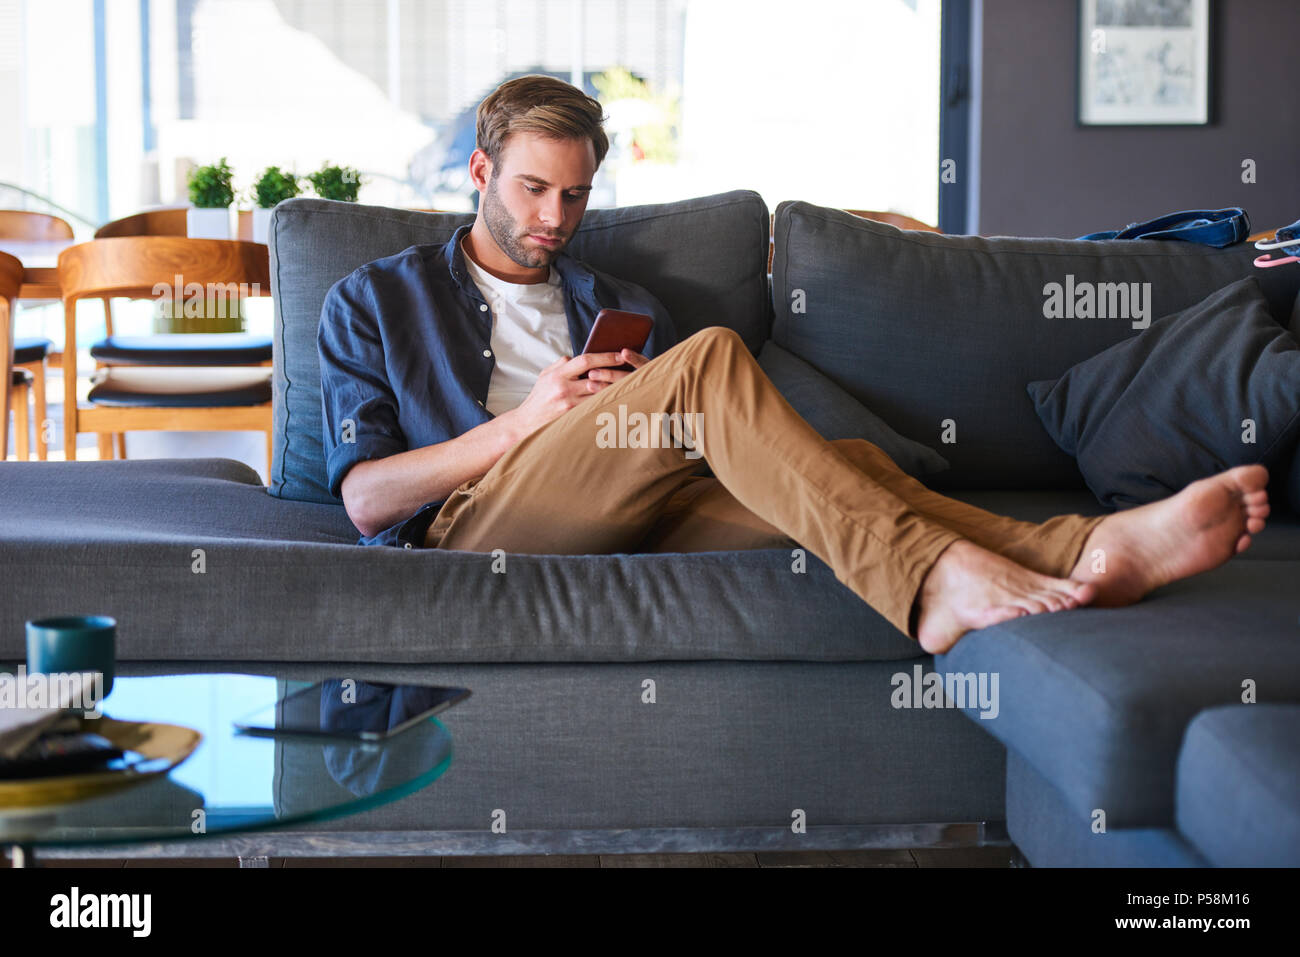 Wide shot of an attractive caucasian man sitting on a generous sofa in a modern home, while texting on his latest mobile phone with his feet up on the couch and relaxing. Stock Photo